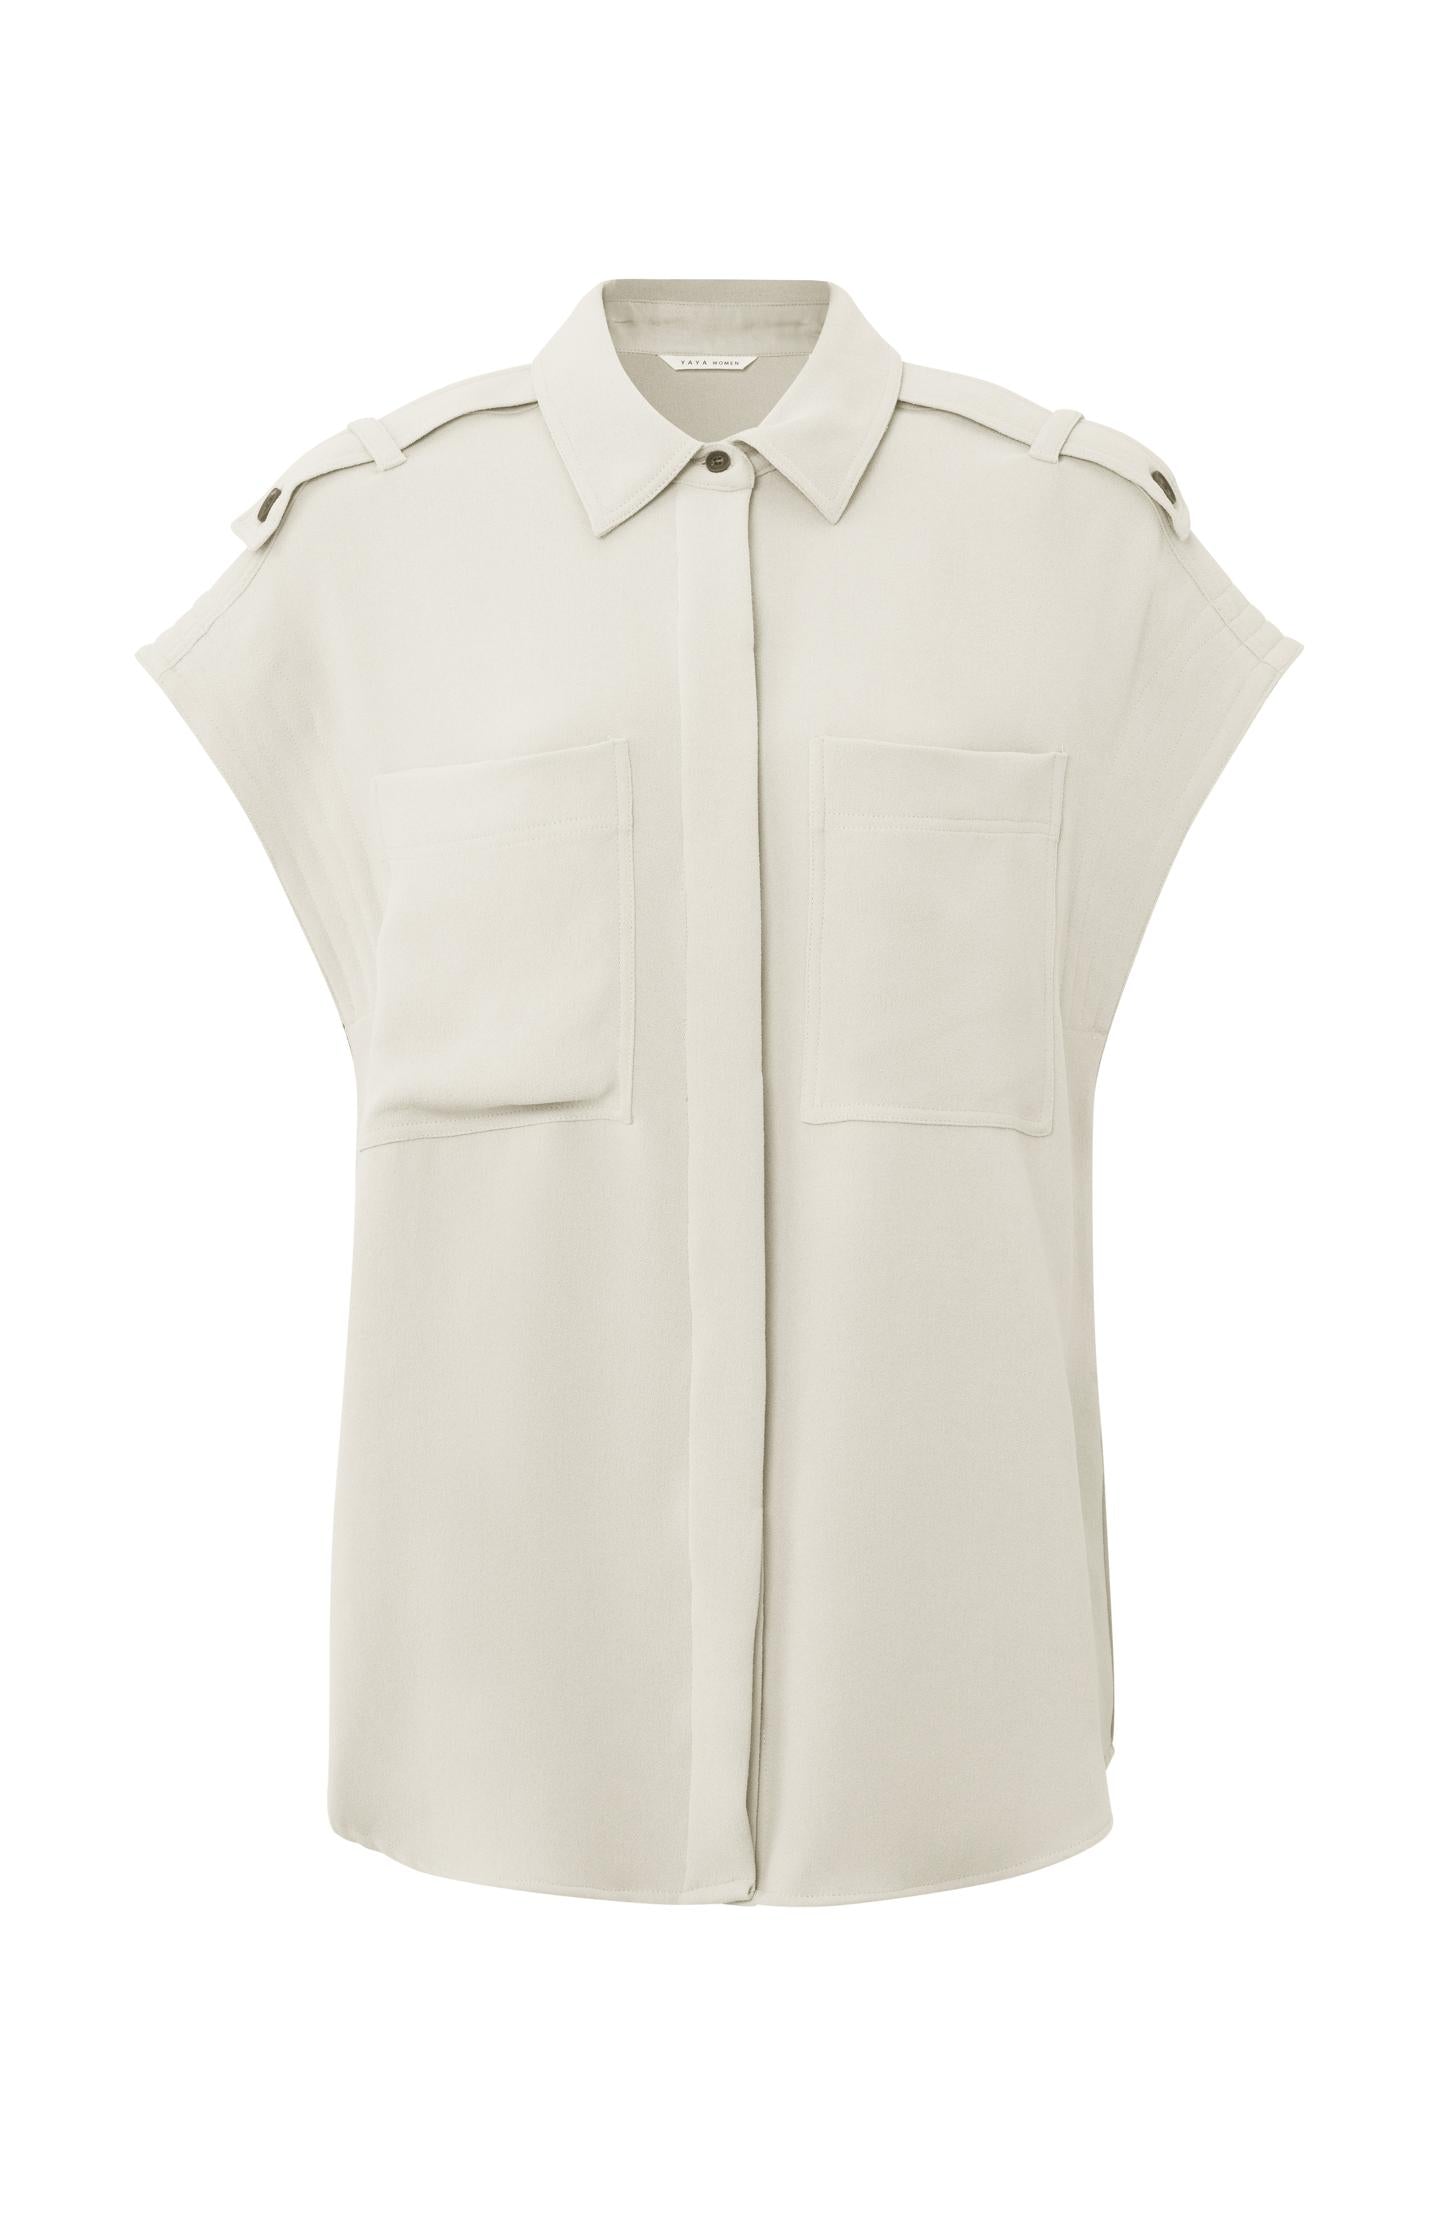 Sleeveless shirt jacket with chest pockets and button detail - Type: product